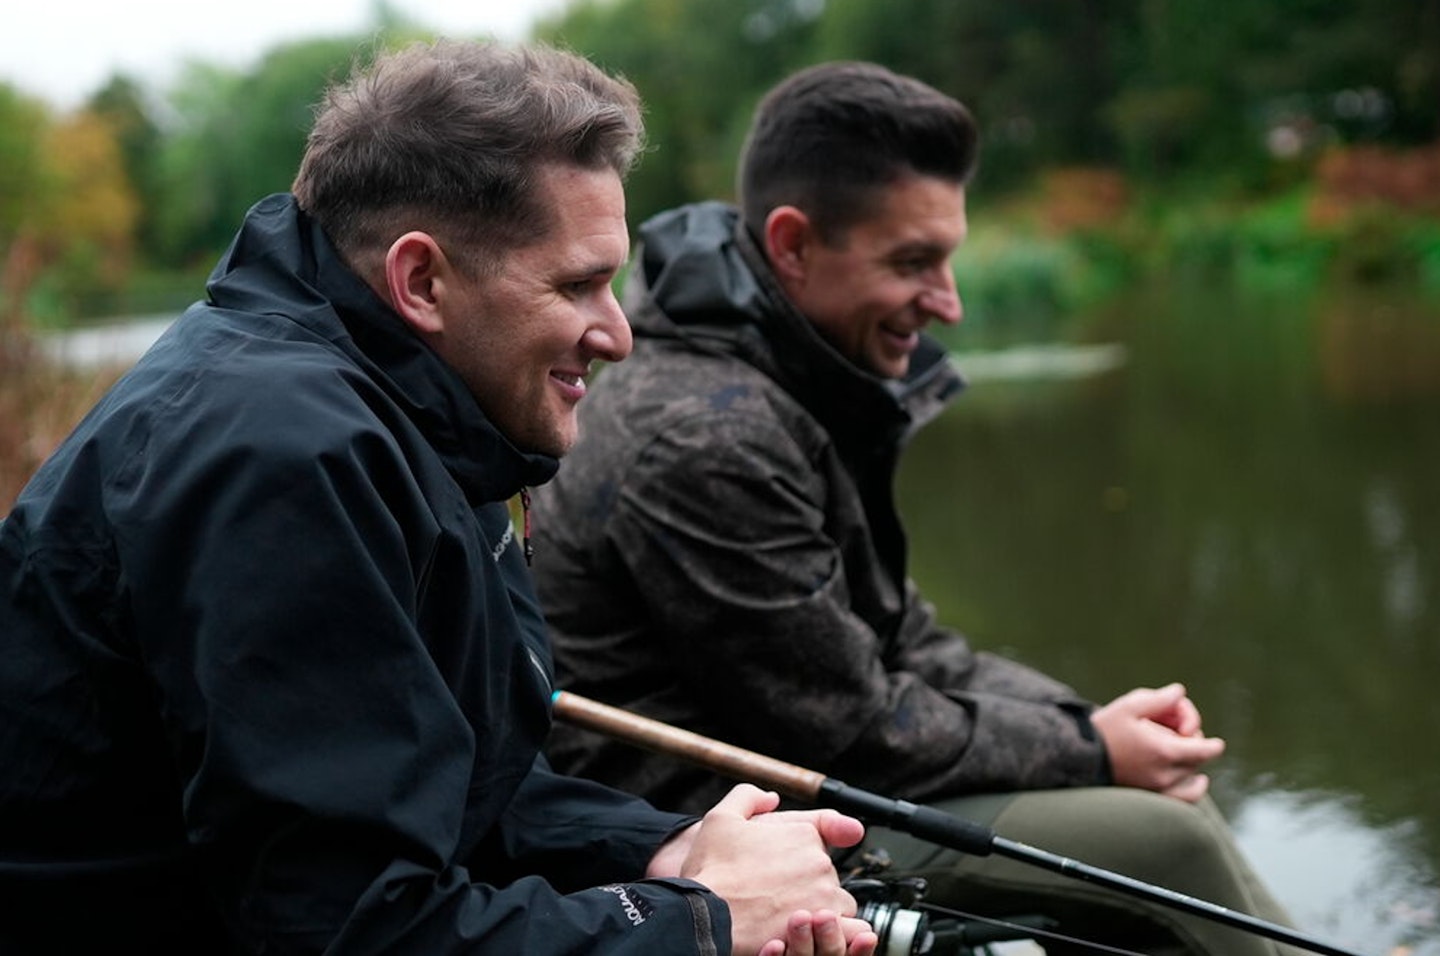 The survey hopes to prove angling’s health benefits for the first time